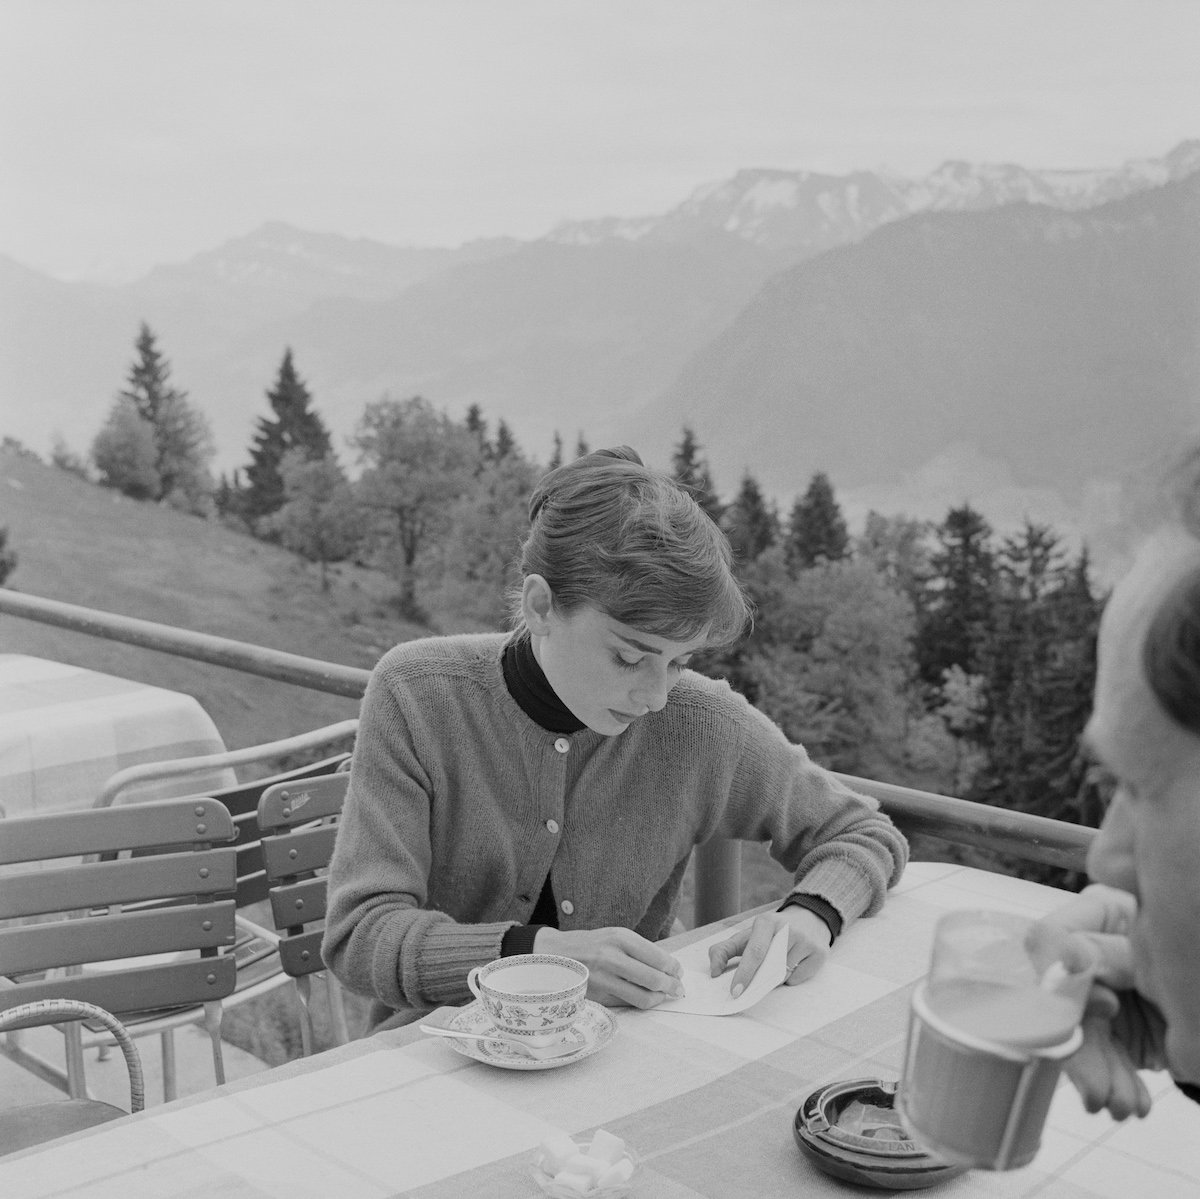 Actress Audrey Hepburn with her husband, American actor Mel Ferrer on the terrace of the Restaurant Hammetschwand at the summit of the Bürgenstock, Switzerland in 1955